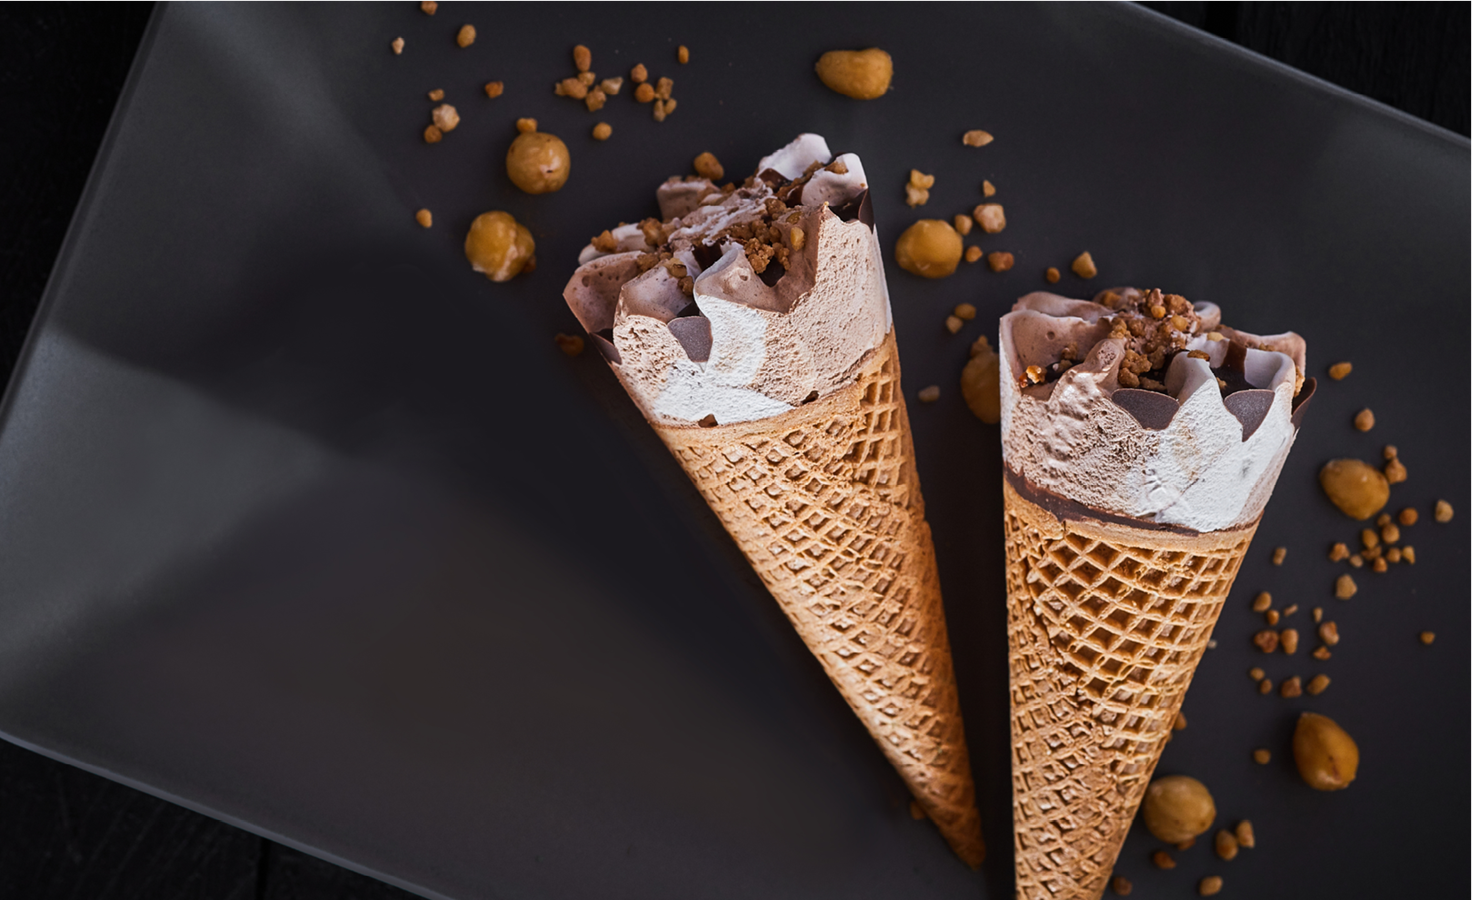 How to create high overrun ice cream without compromising on quality